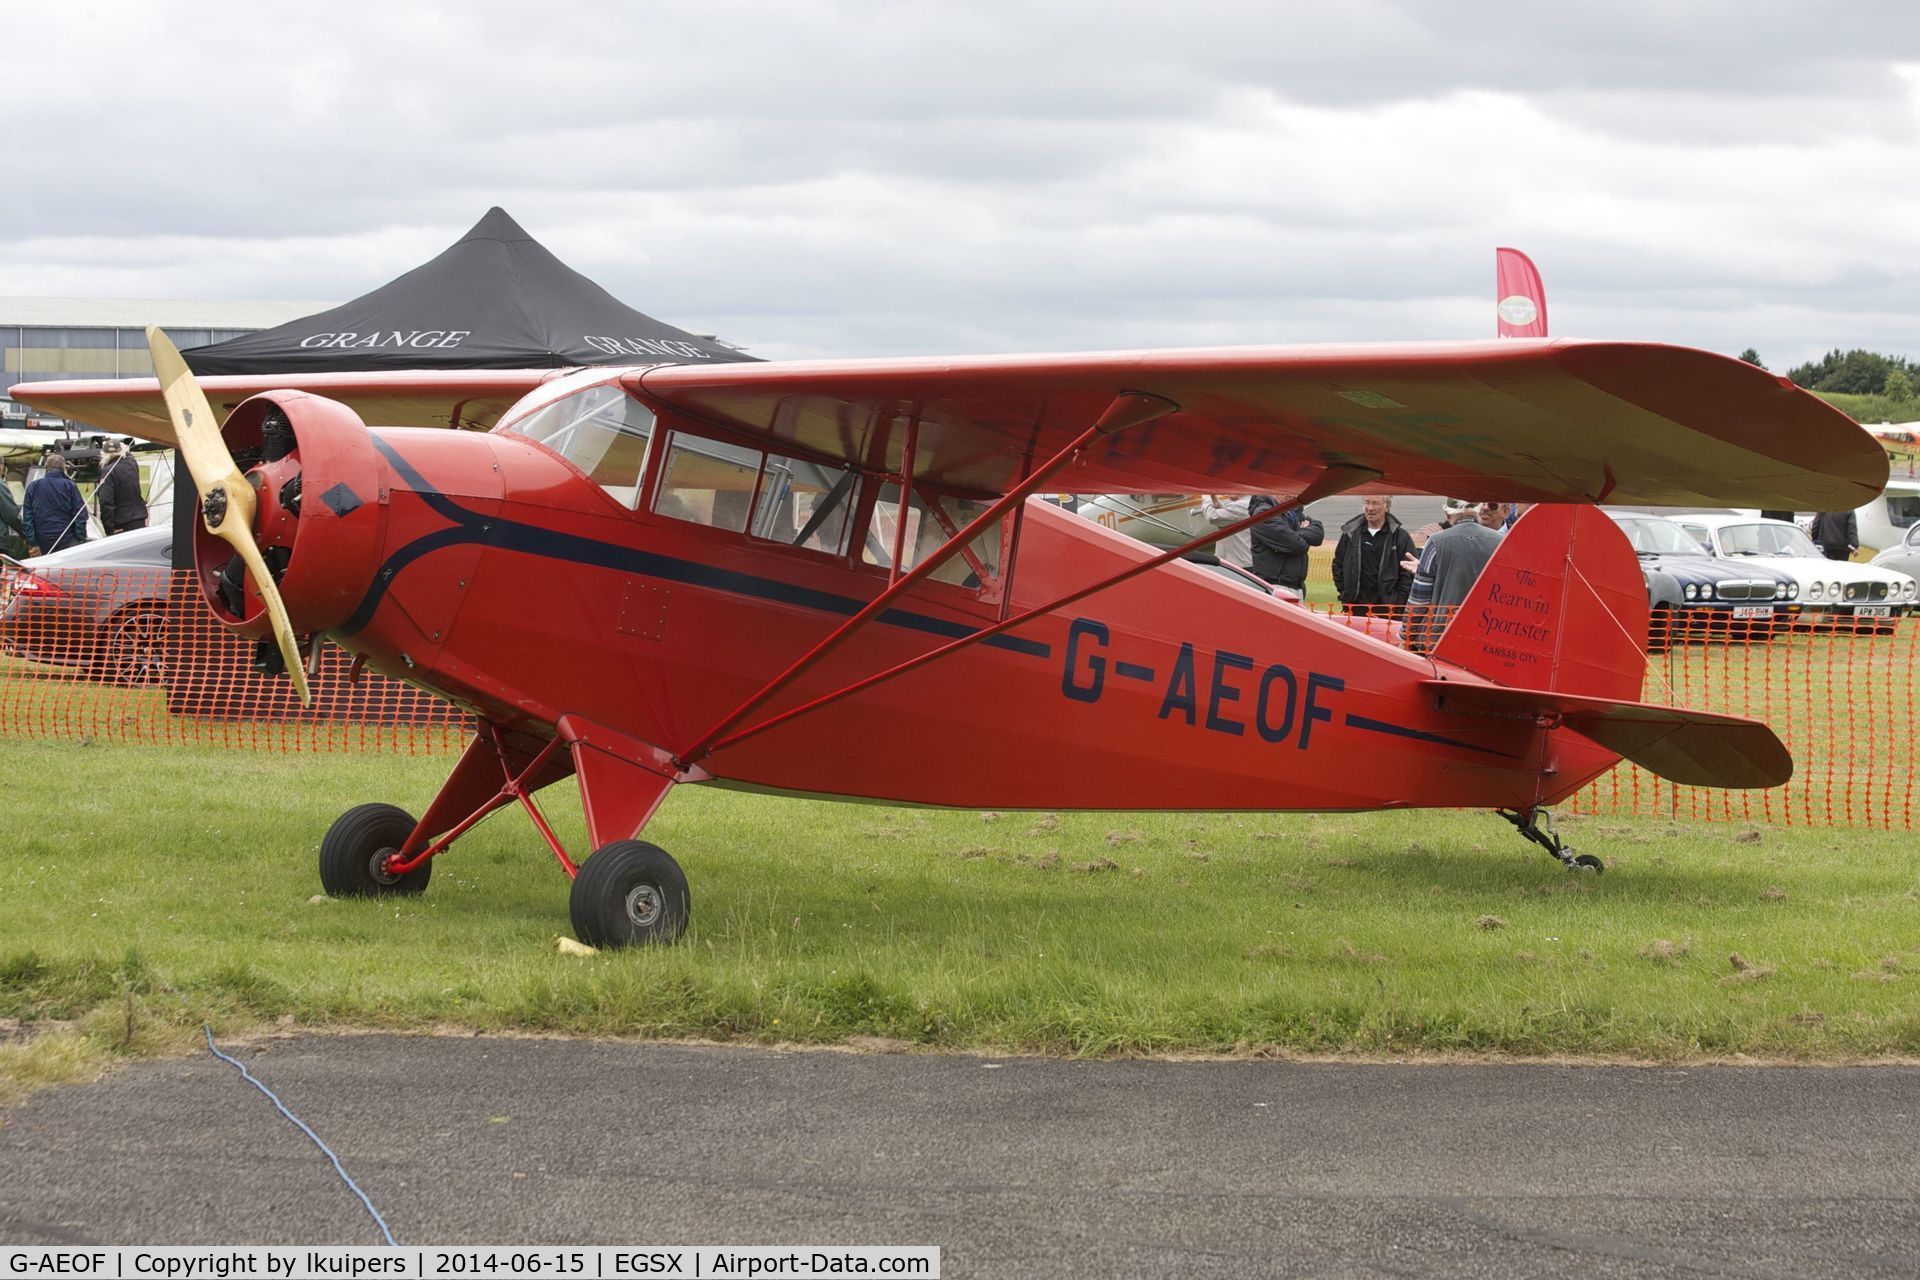 G-AEOF, 1936 Rearwin 8500 Sportster C/N 462, This Rearwin Sportster visited the 2014 Classic aircraft Fly-in at North Weald on 15 June 2014